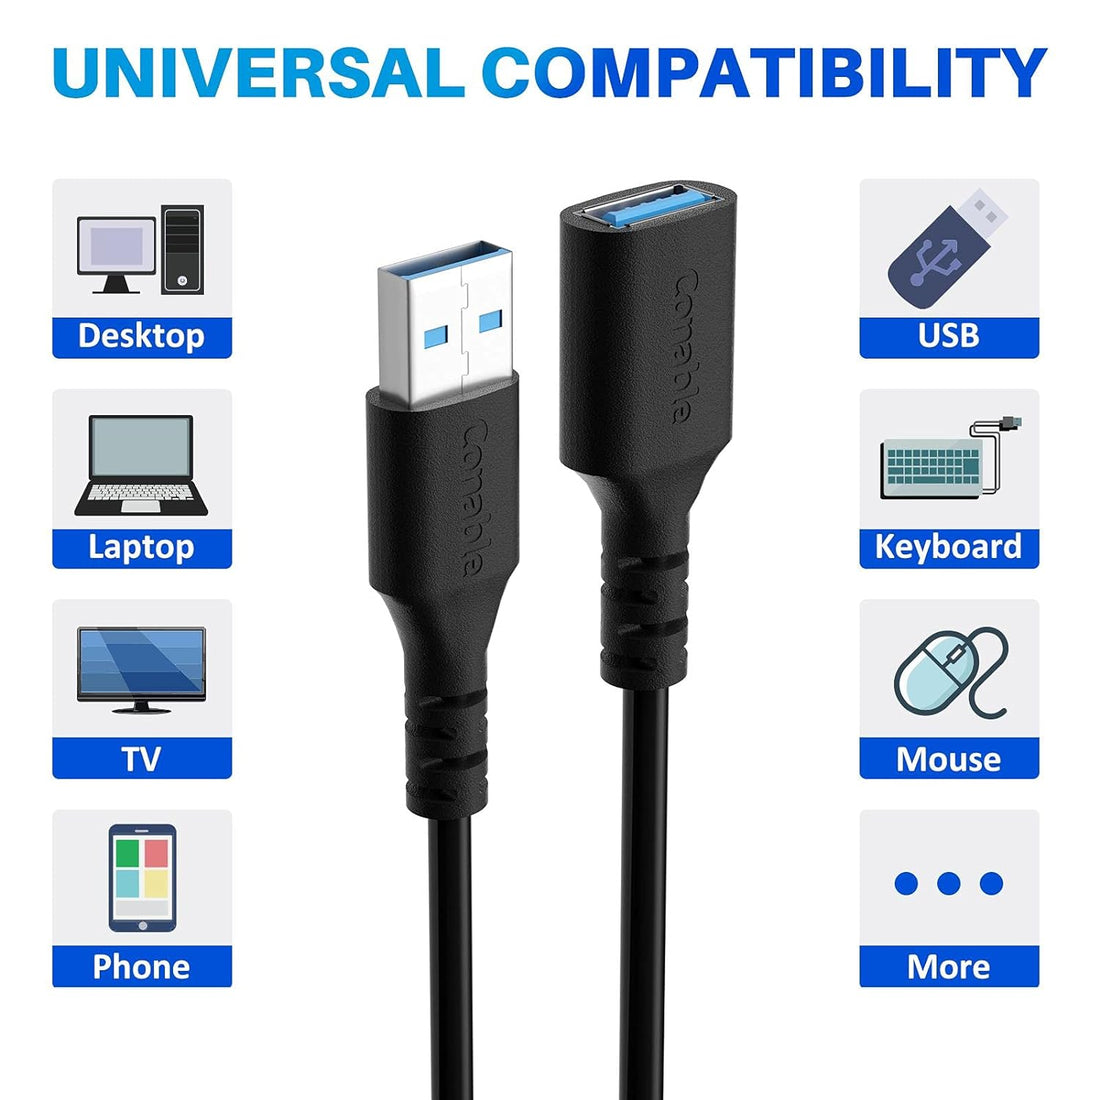 3 Pack USB 3.0 Extension Cable with 5 Velcro Ties, 15Feet/4.58M, Type A Male to A Female, Extender Cord, 5Gbps Data Transfer Compatible with Printer, Keyboard, Mouse, Flash Drive, Hard Drive and More